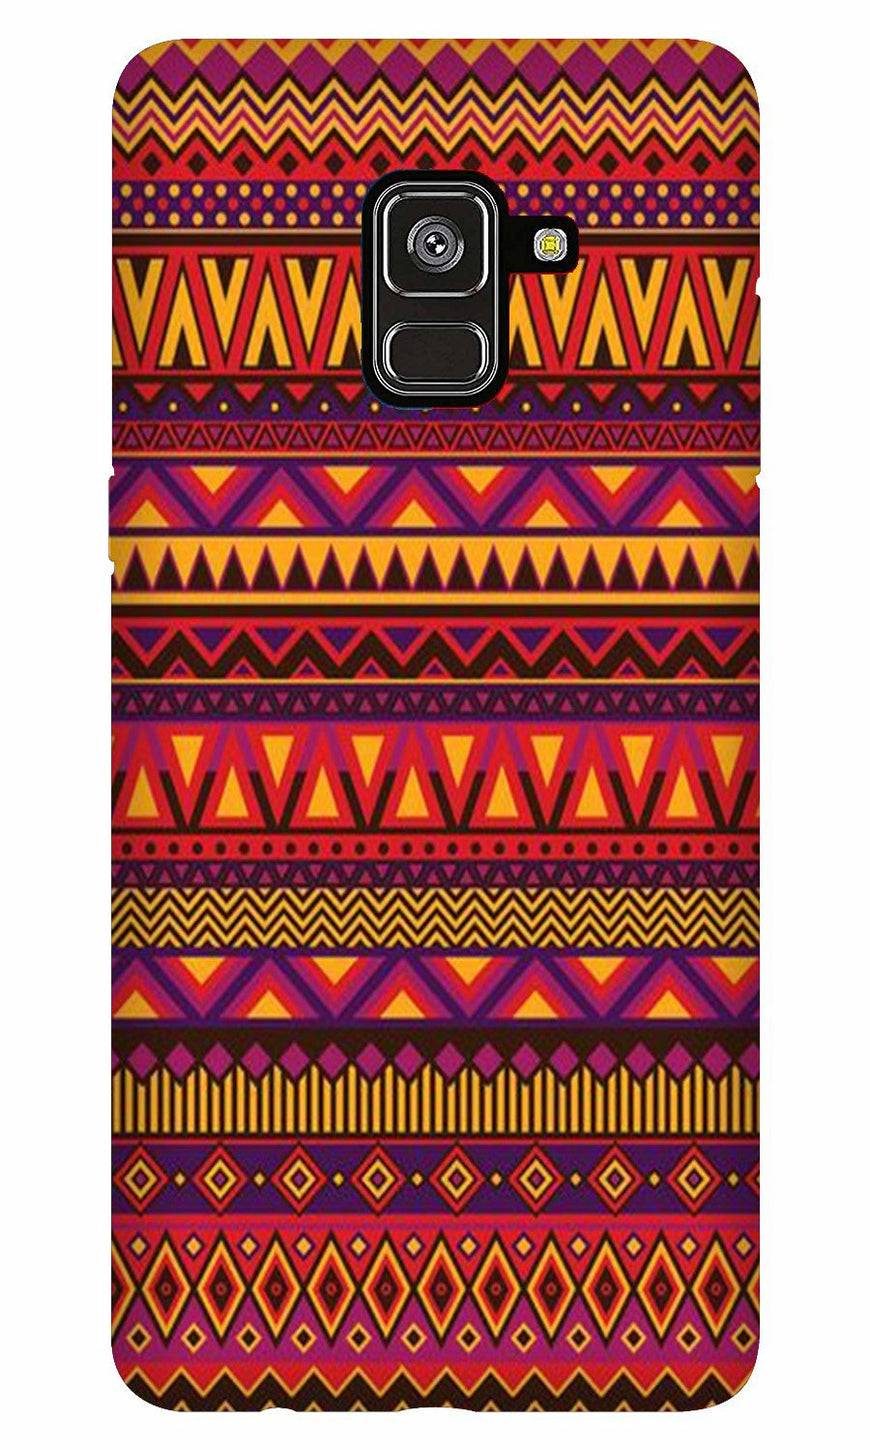 Zigzag line pattern2 Case for Galaxy A5 (2018)